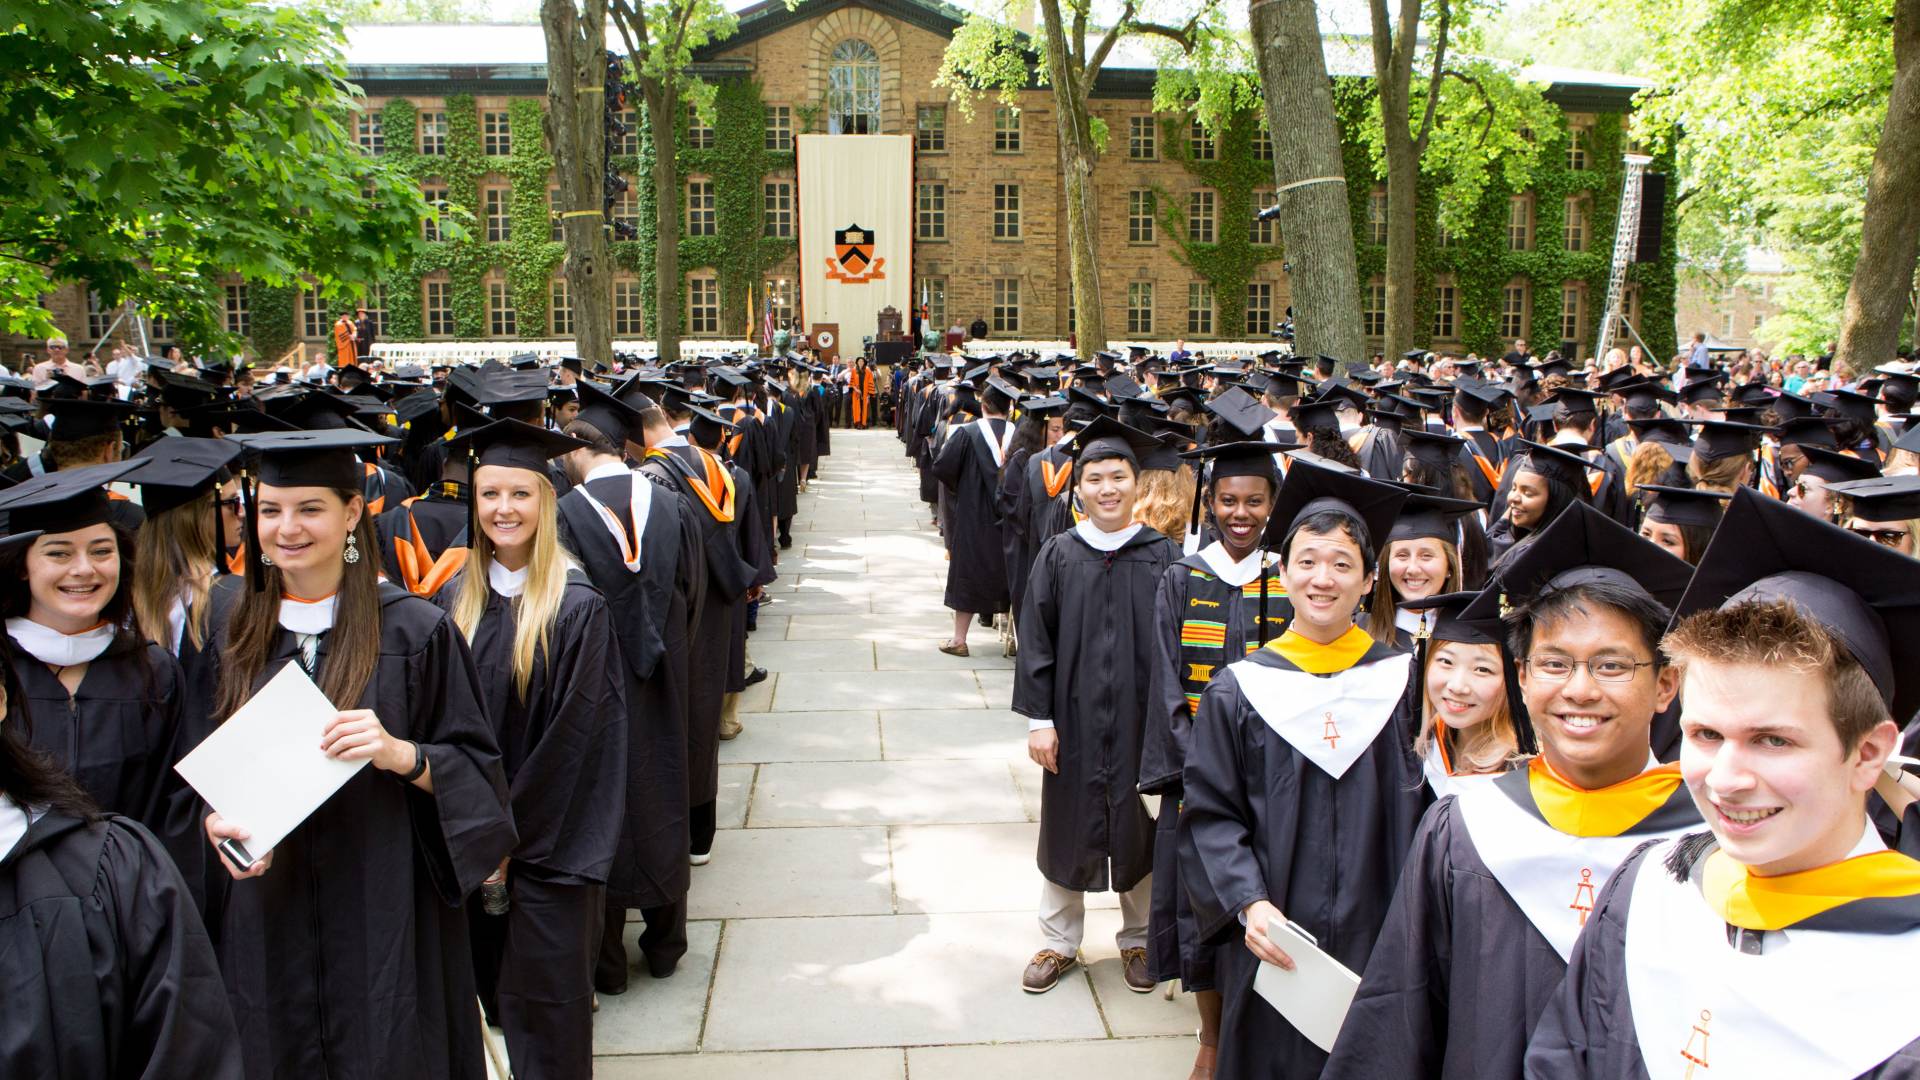 Students standing in front of Nassau Hall for Commencement